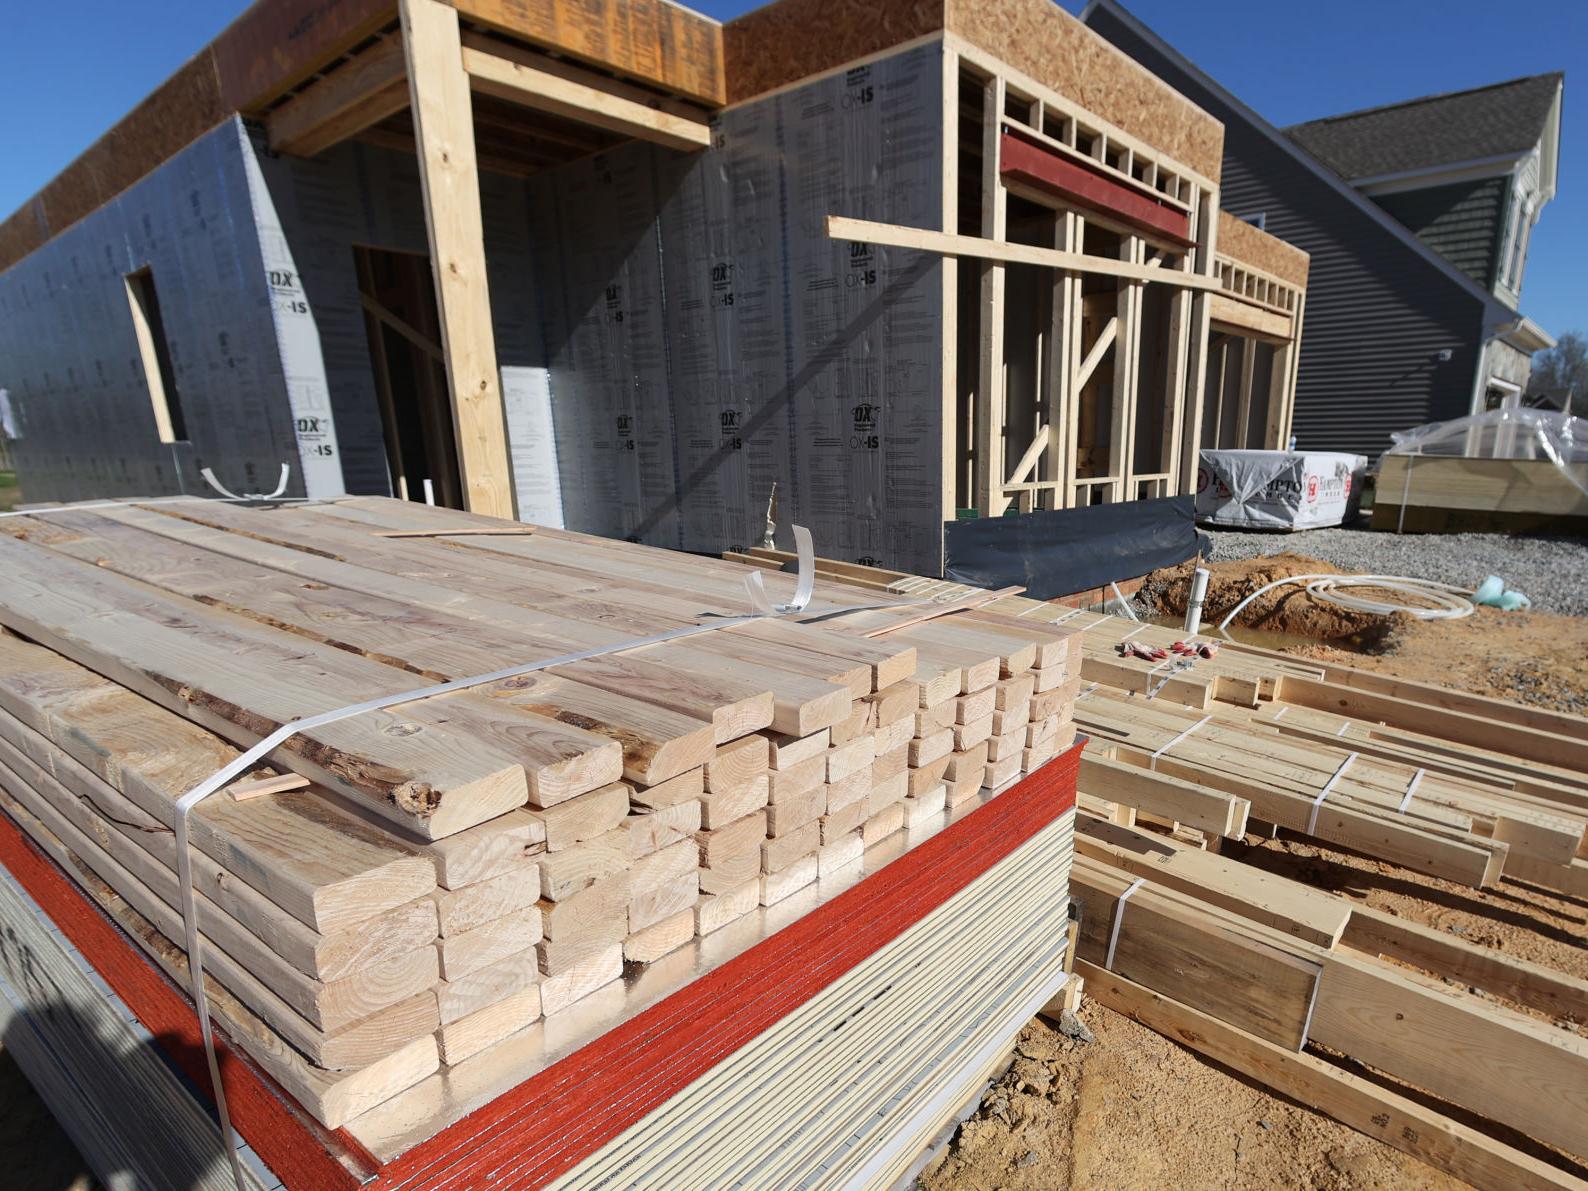 It's been crazy:' Pandemic has sent lumber prices soaring, causing home  construction costs to rise amid strong demand | Business News | richmond.com